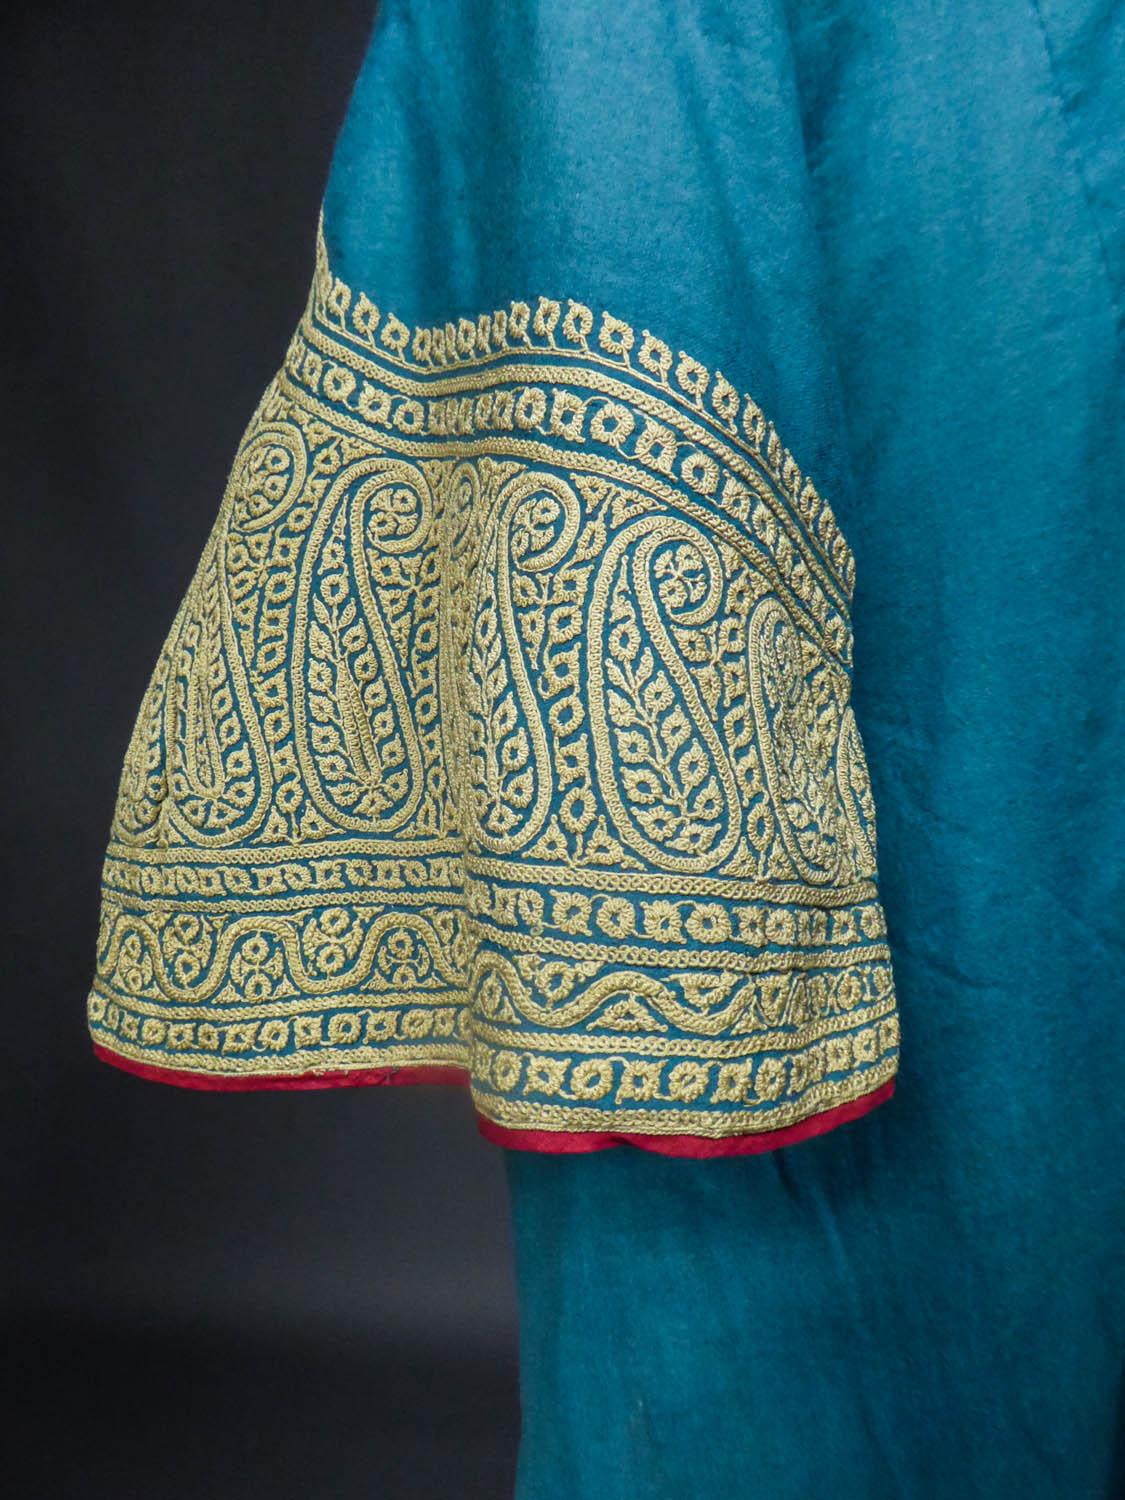 Dignitary coat or Choga - Indes Punjab 19th century 3